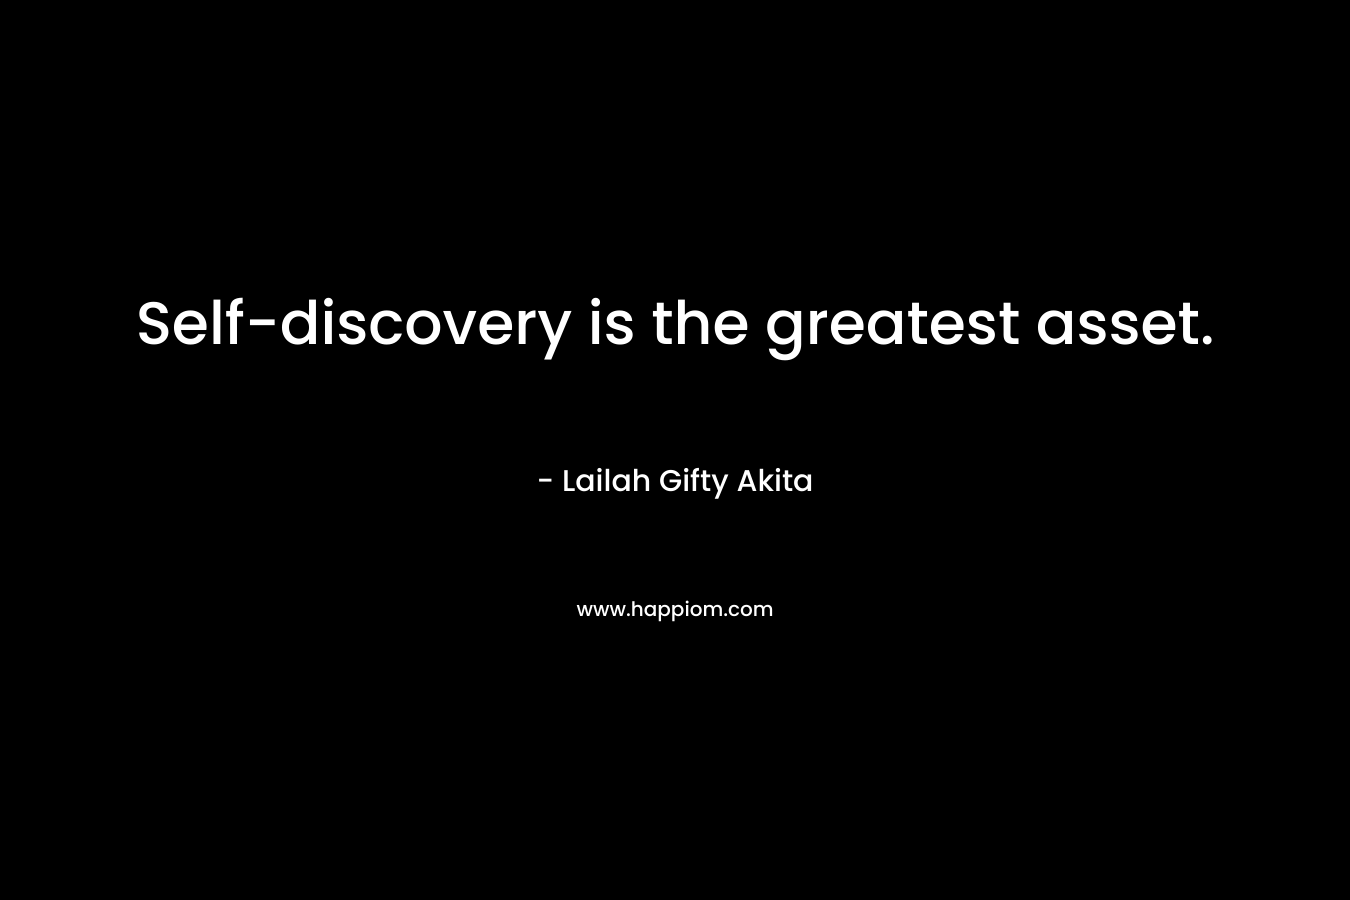 Self-discovery is the greatest asset.